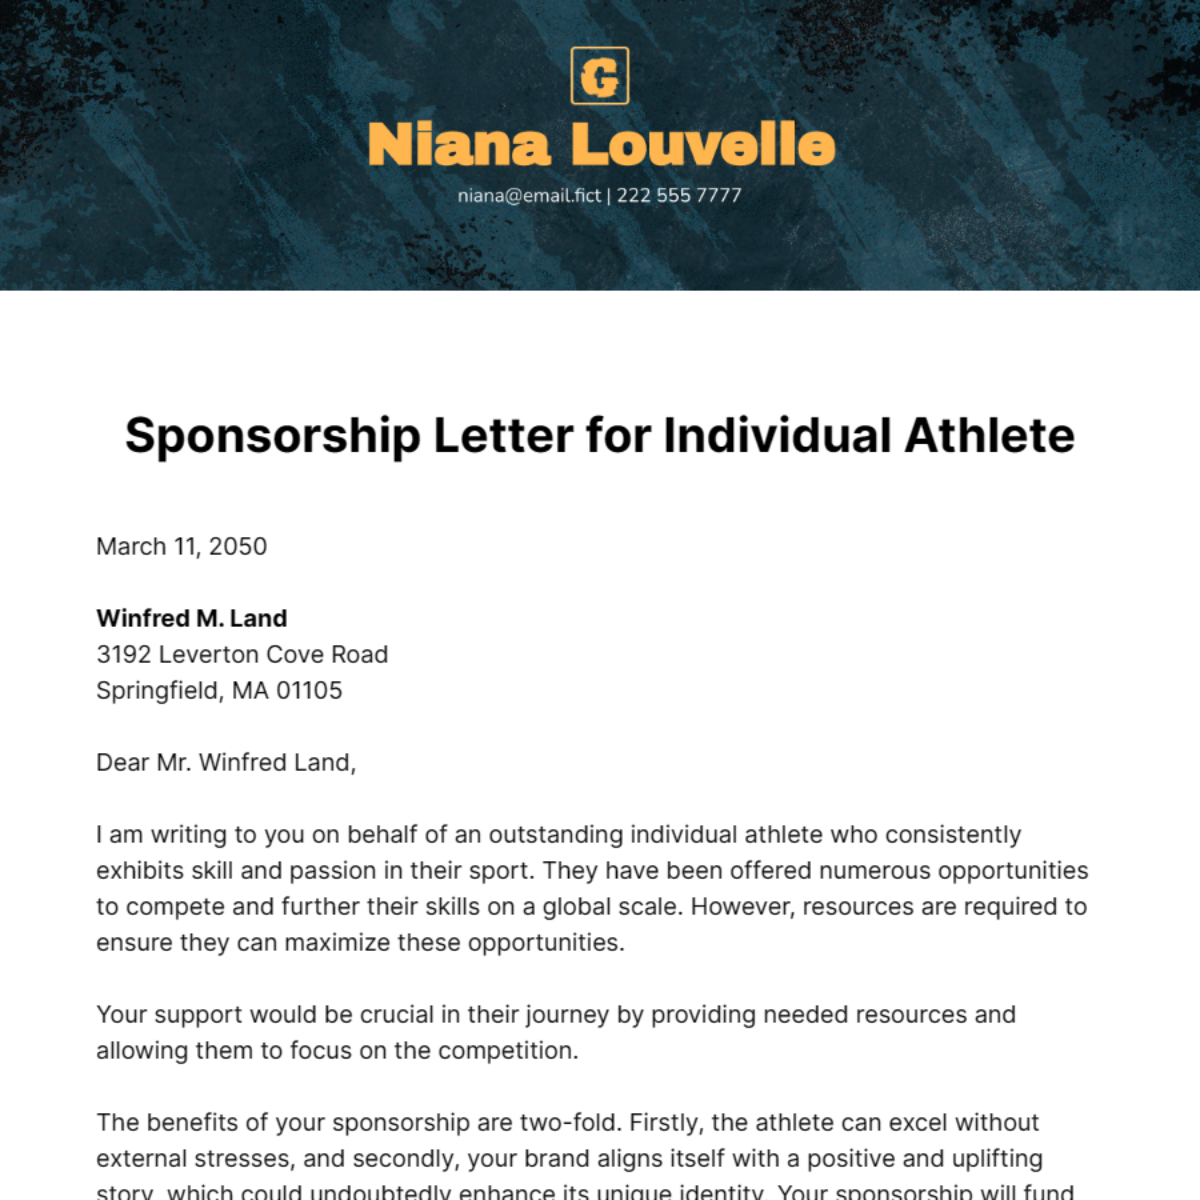 Sponsorship Letter for Individual Athlete Template